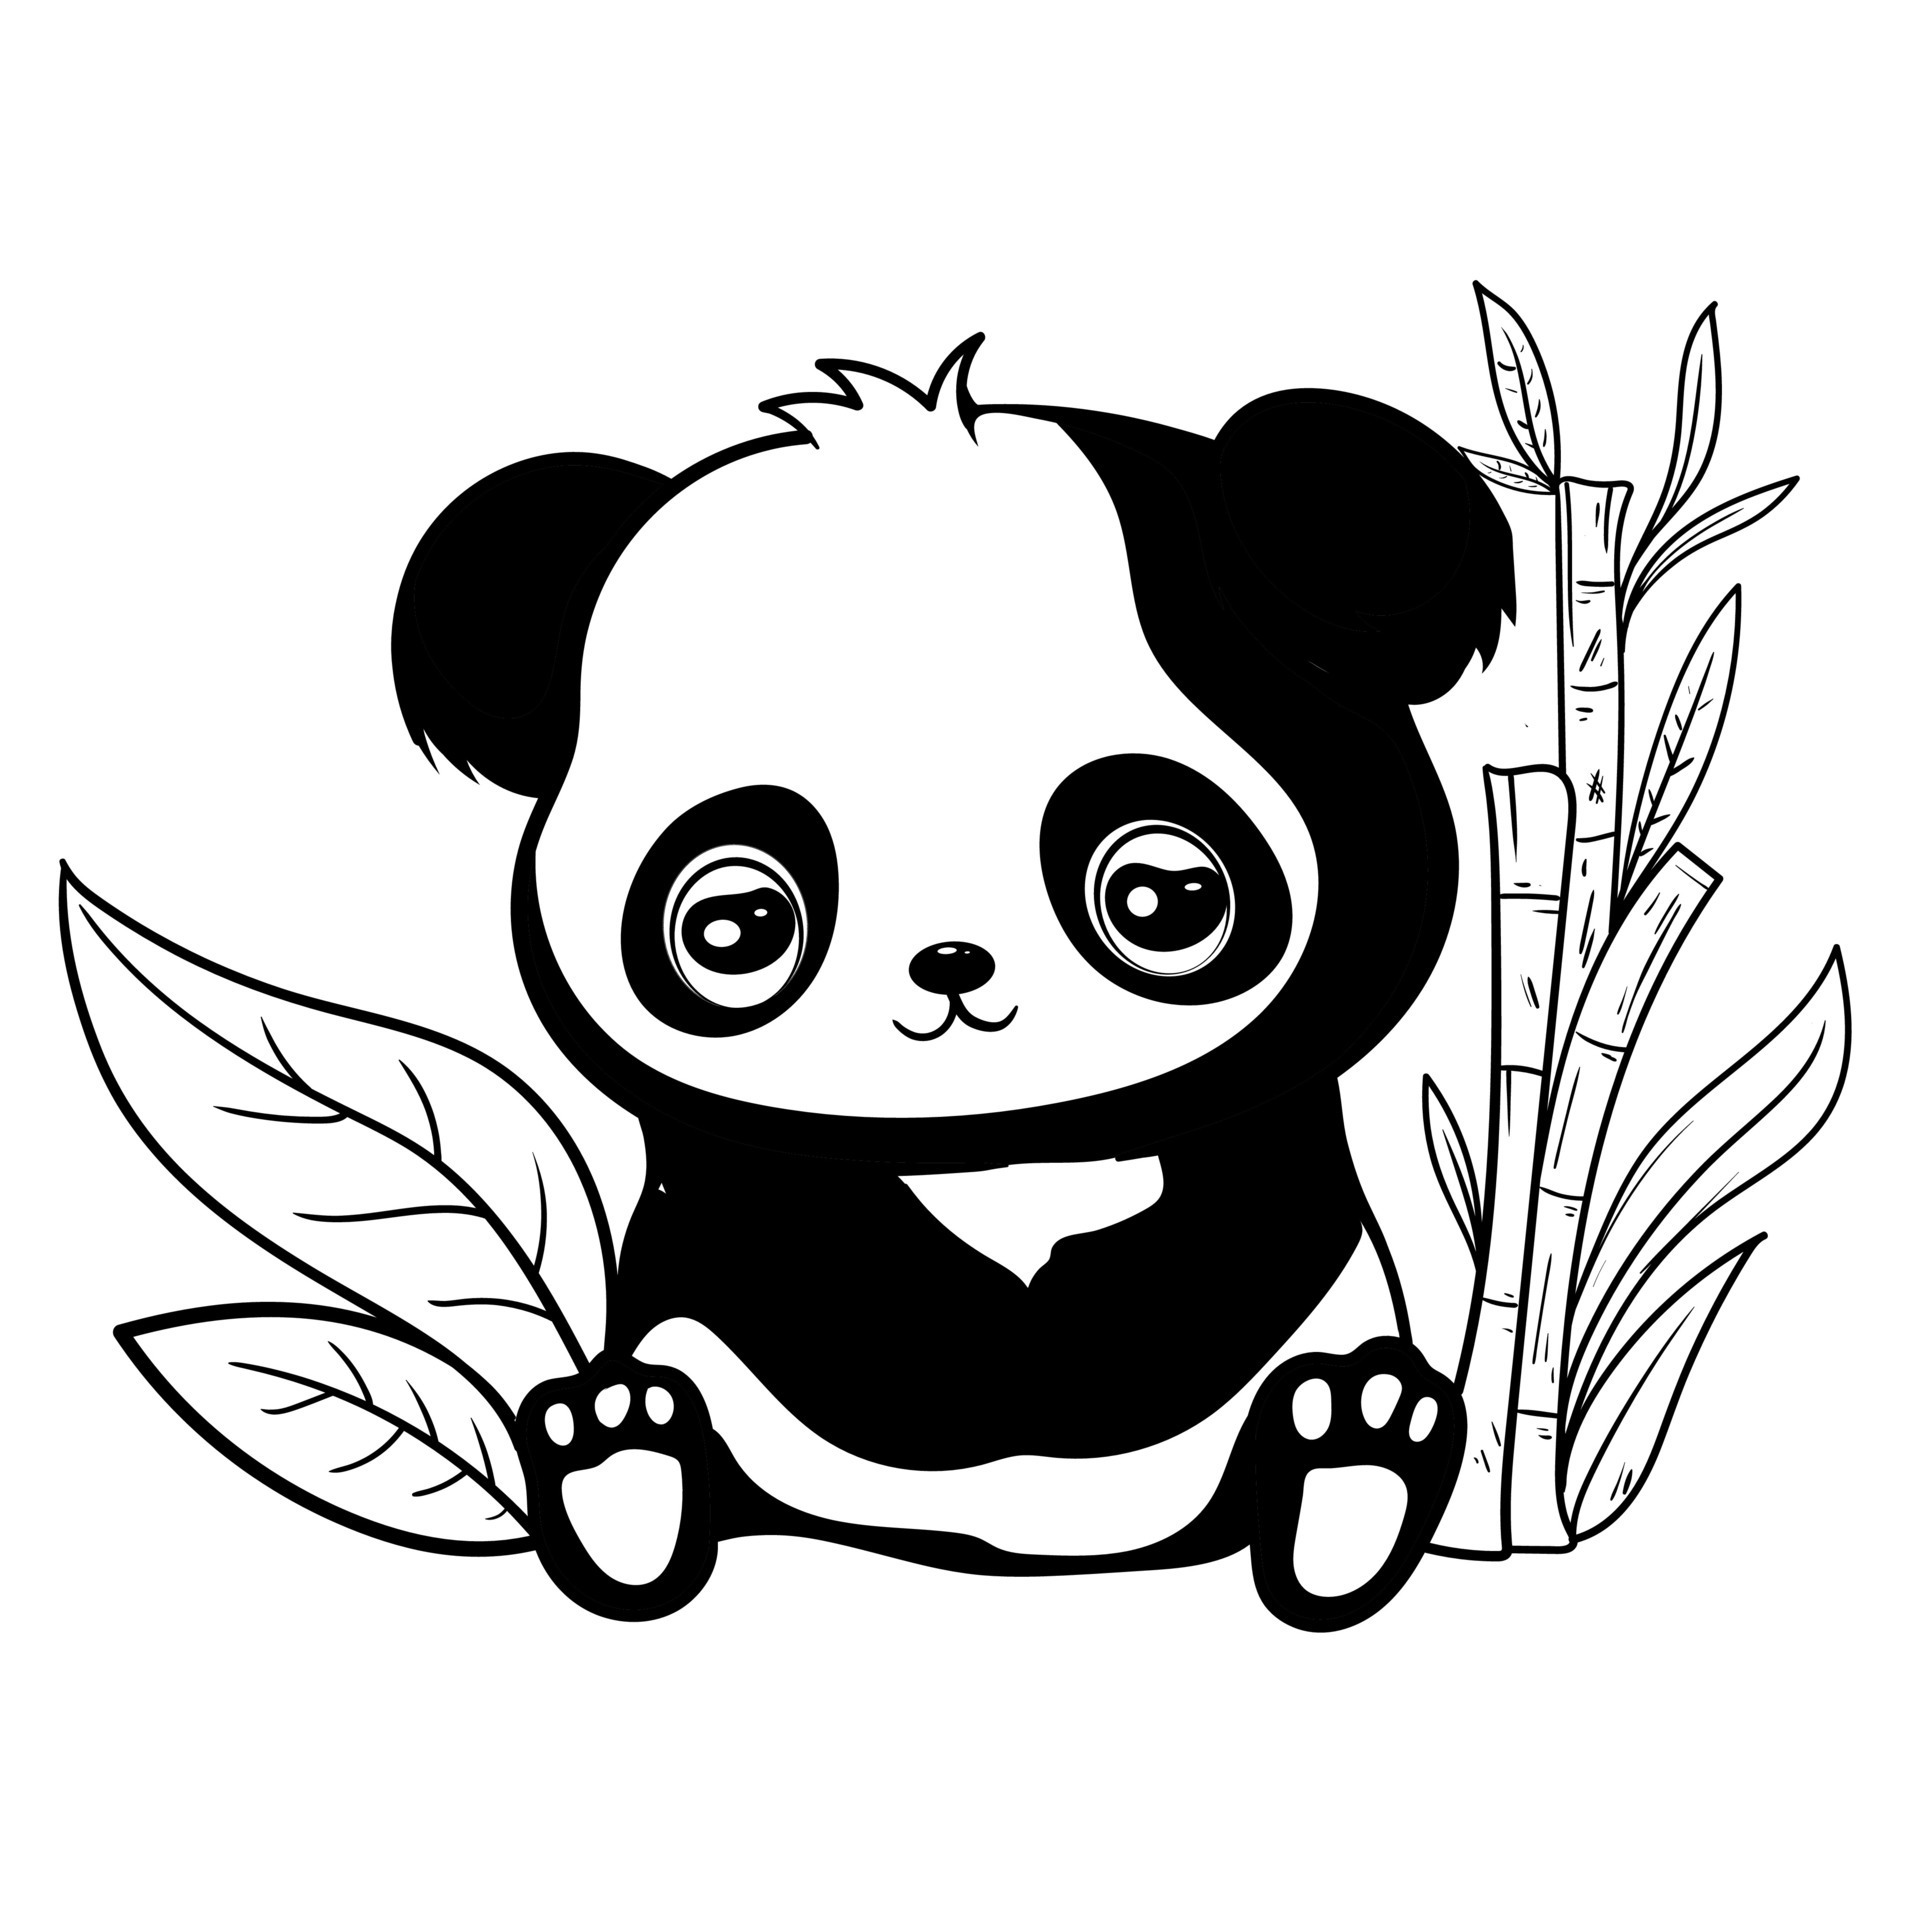 Download Cute Panda Heart Easy Drawing Picture | Wallpapers.com-saigonsouth.com.vn